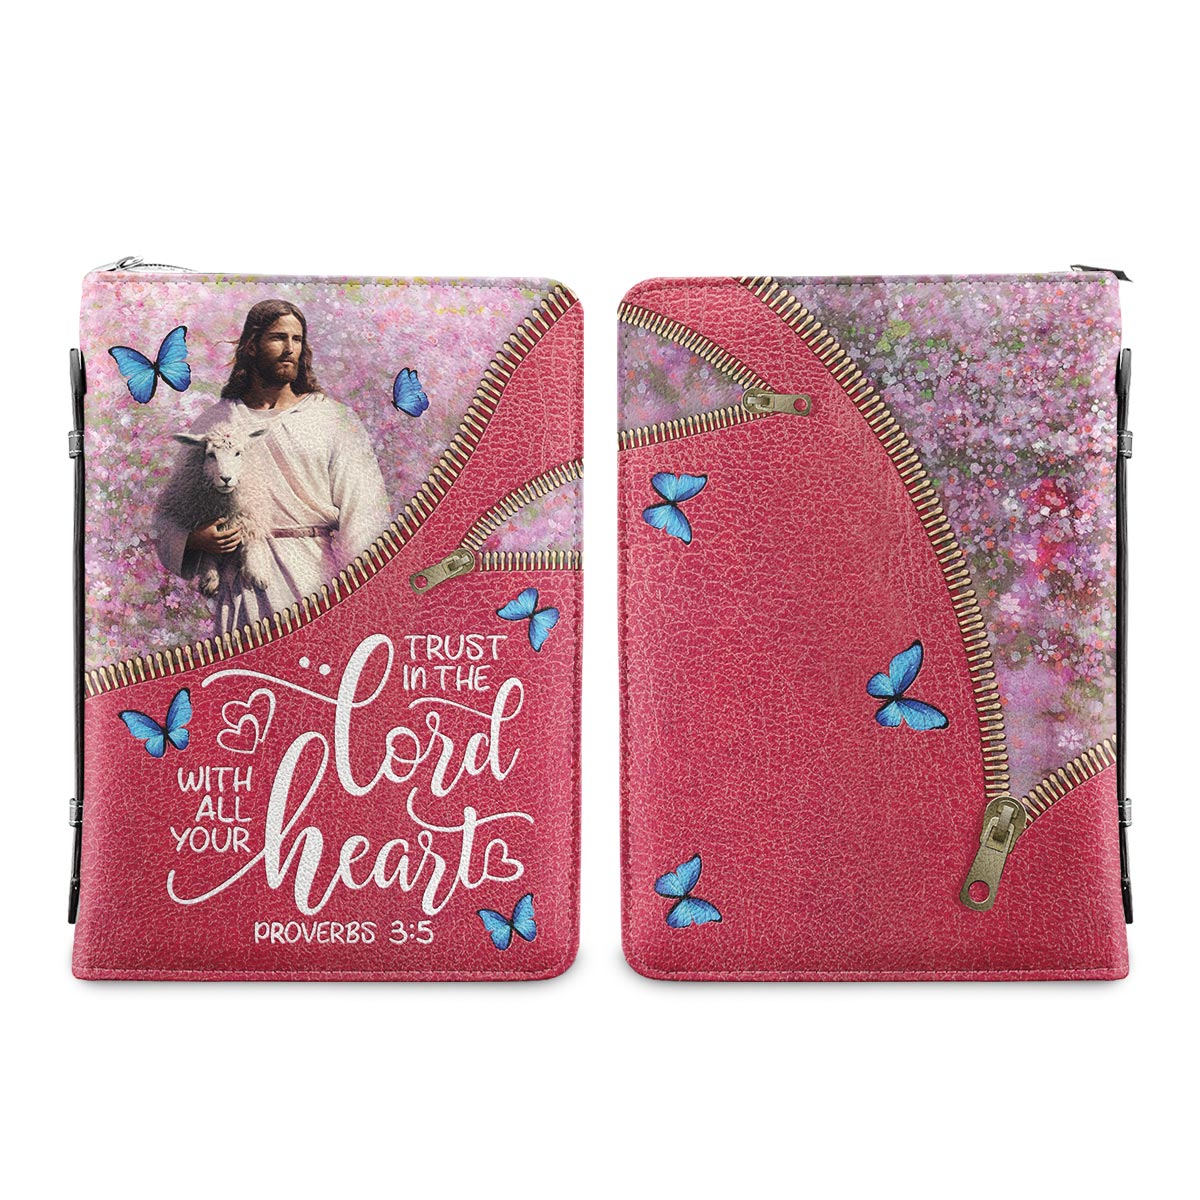 Trust In The Lord Proverbs 3 5 Butterfly Zipper Style Personalized Bible Cover - Christian Bible Covers For Women